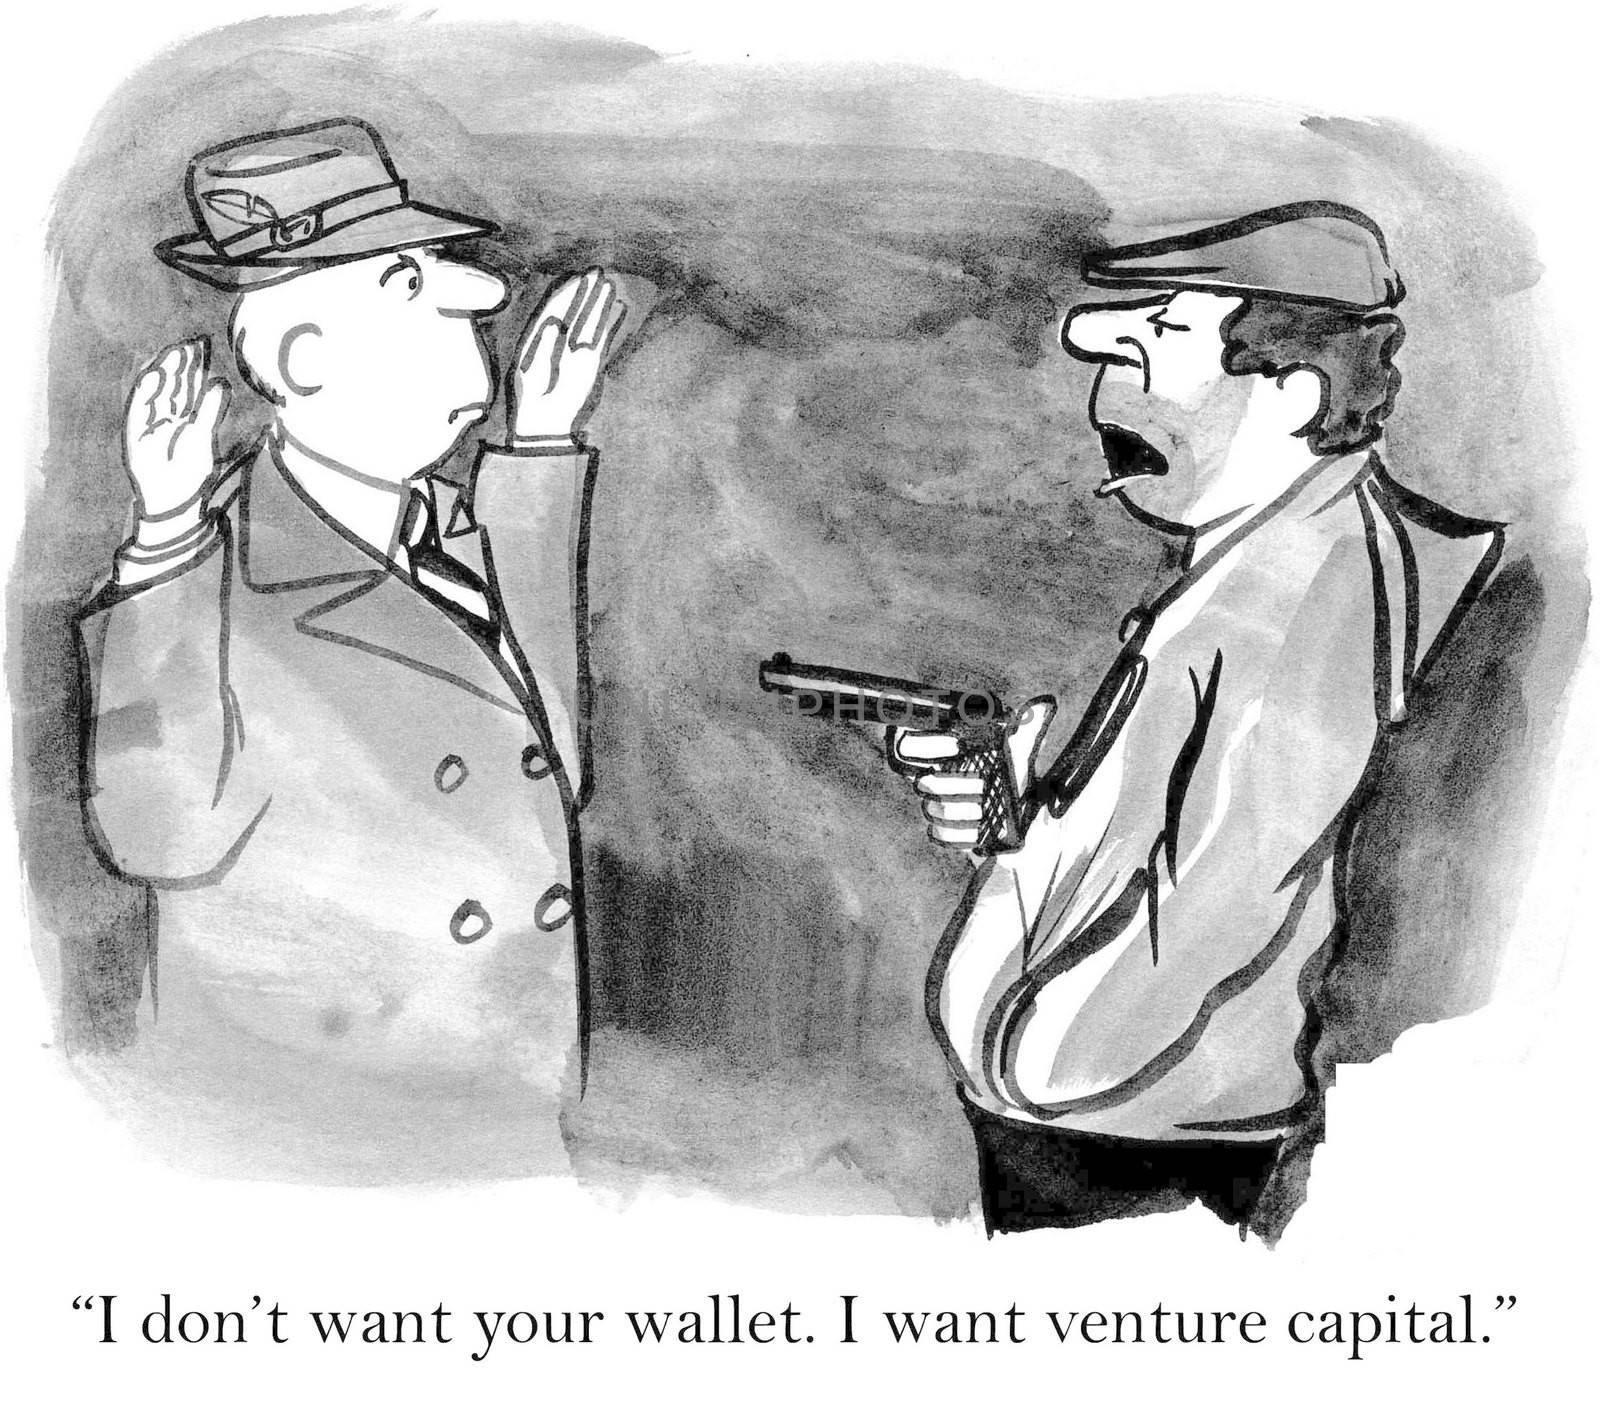 "I don't want your wallet, I want venture capital."